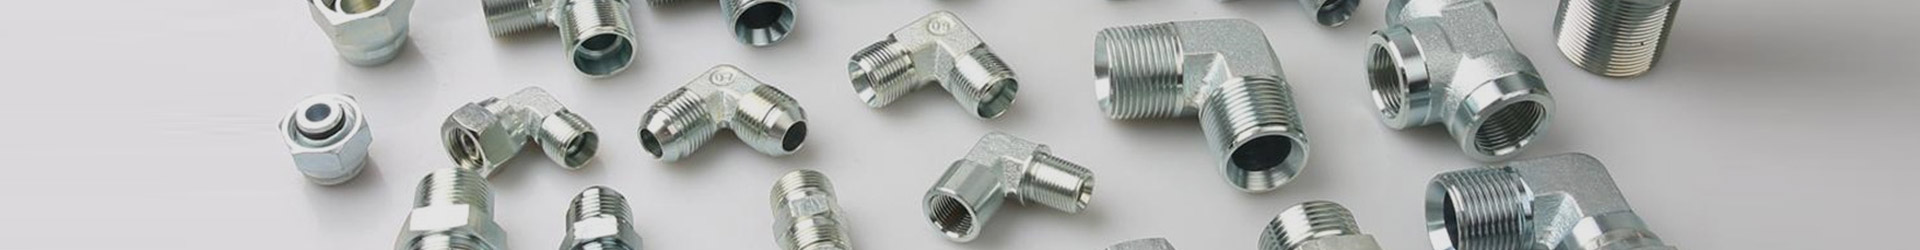 Metric Thread O-ring Face Seal Fittings